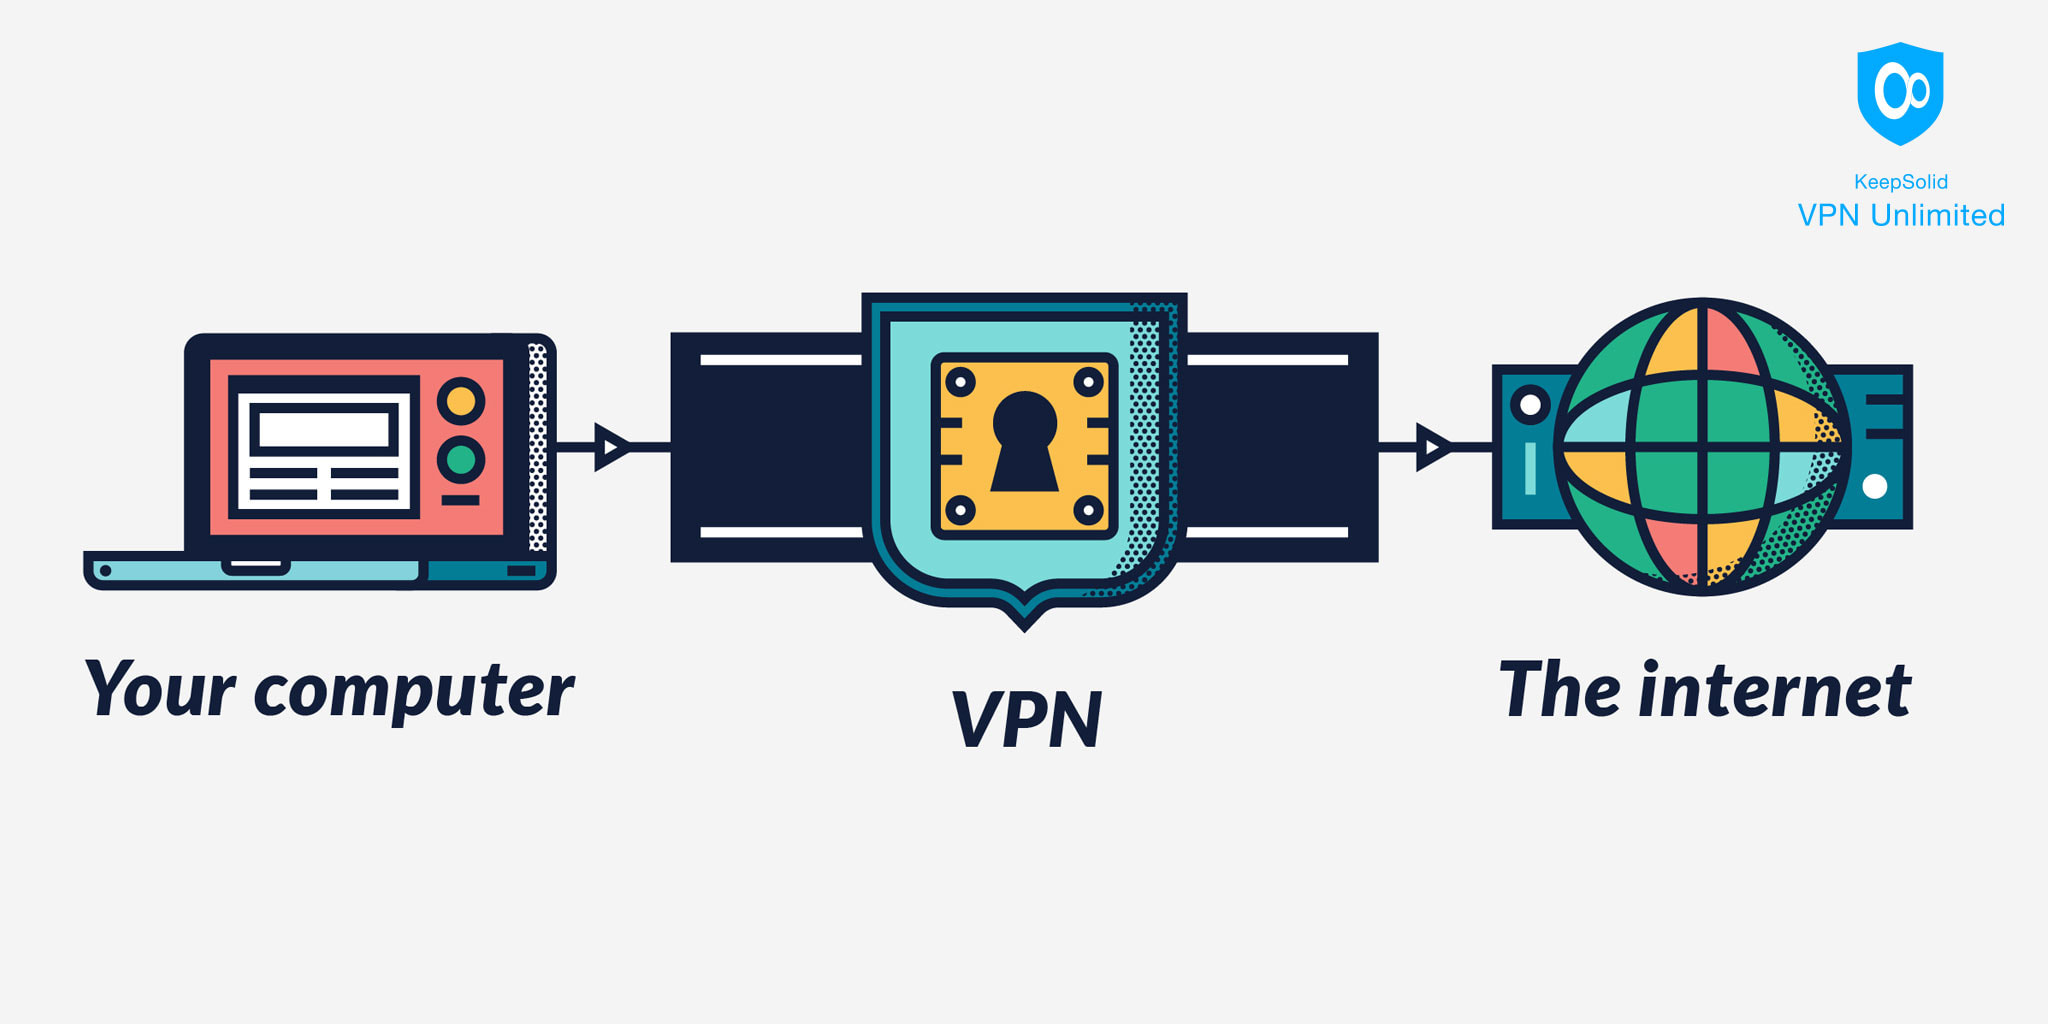 How VPN works - virtual private network between your computer and the internet